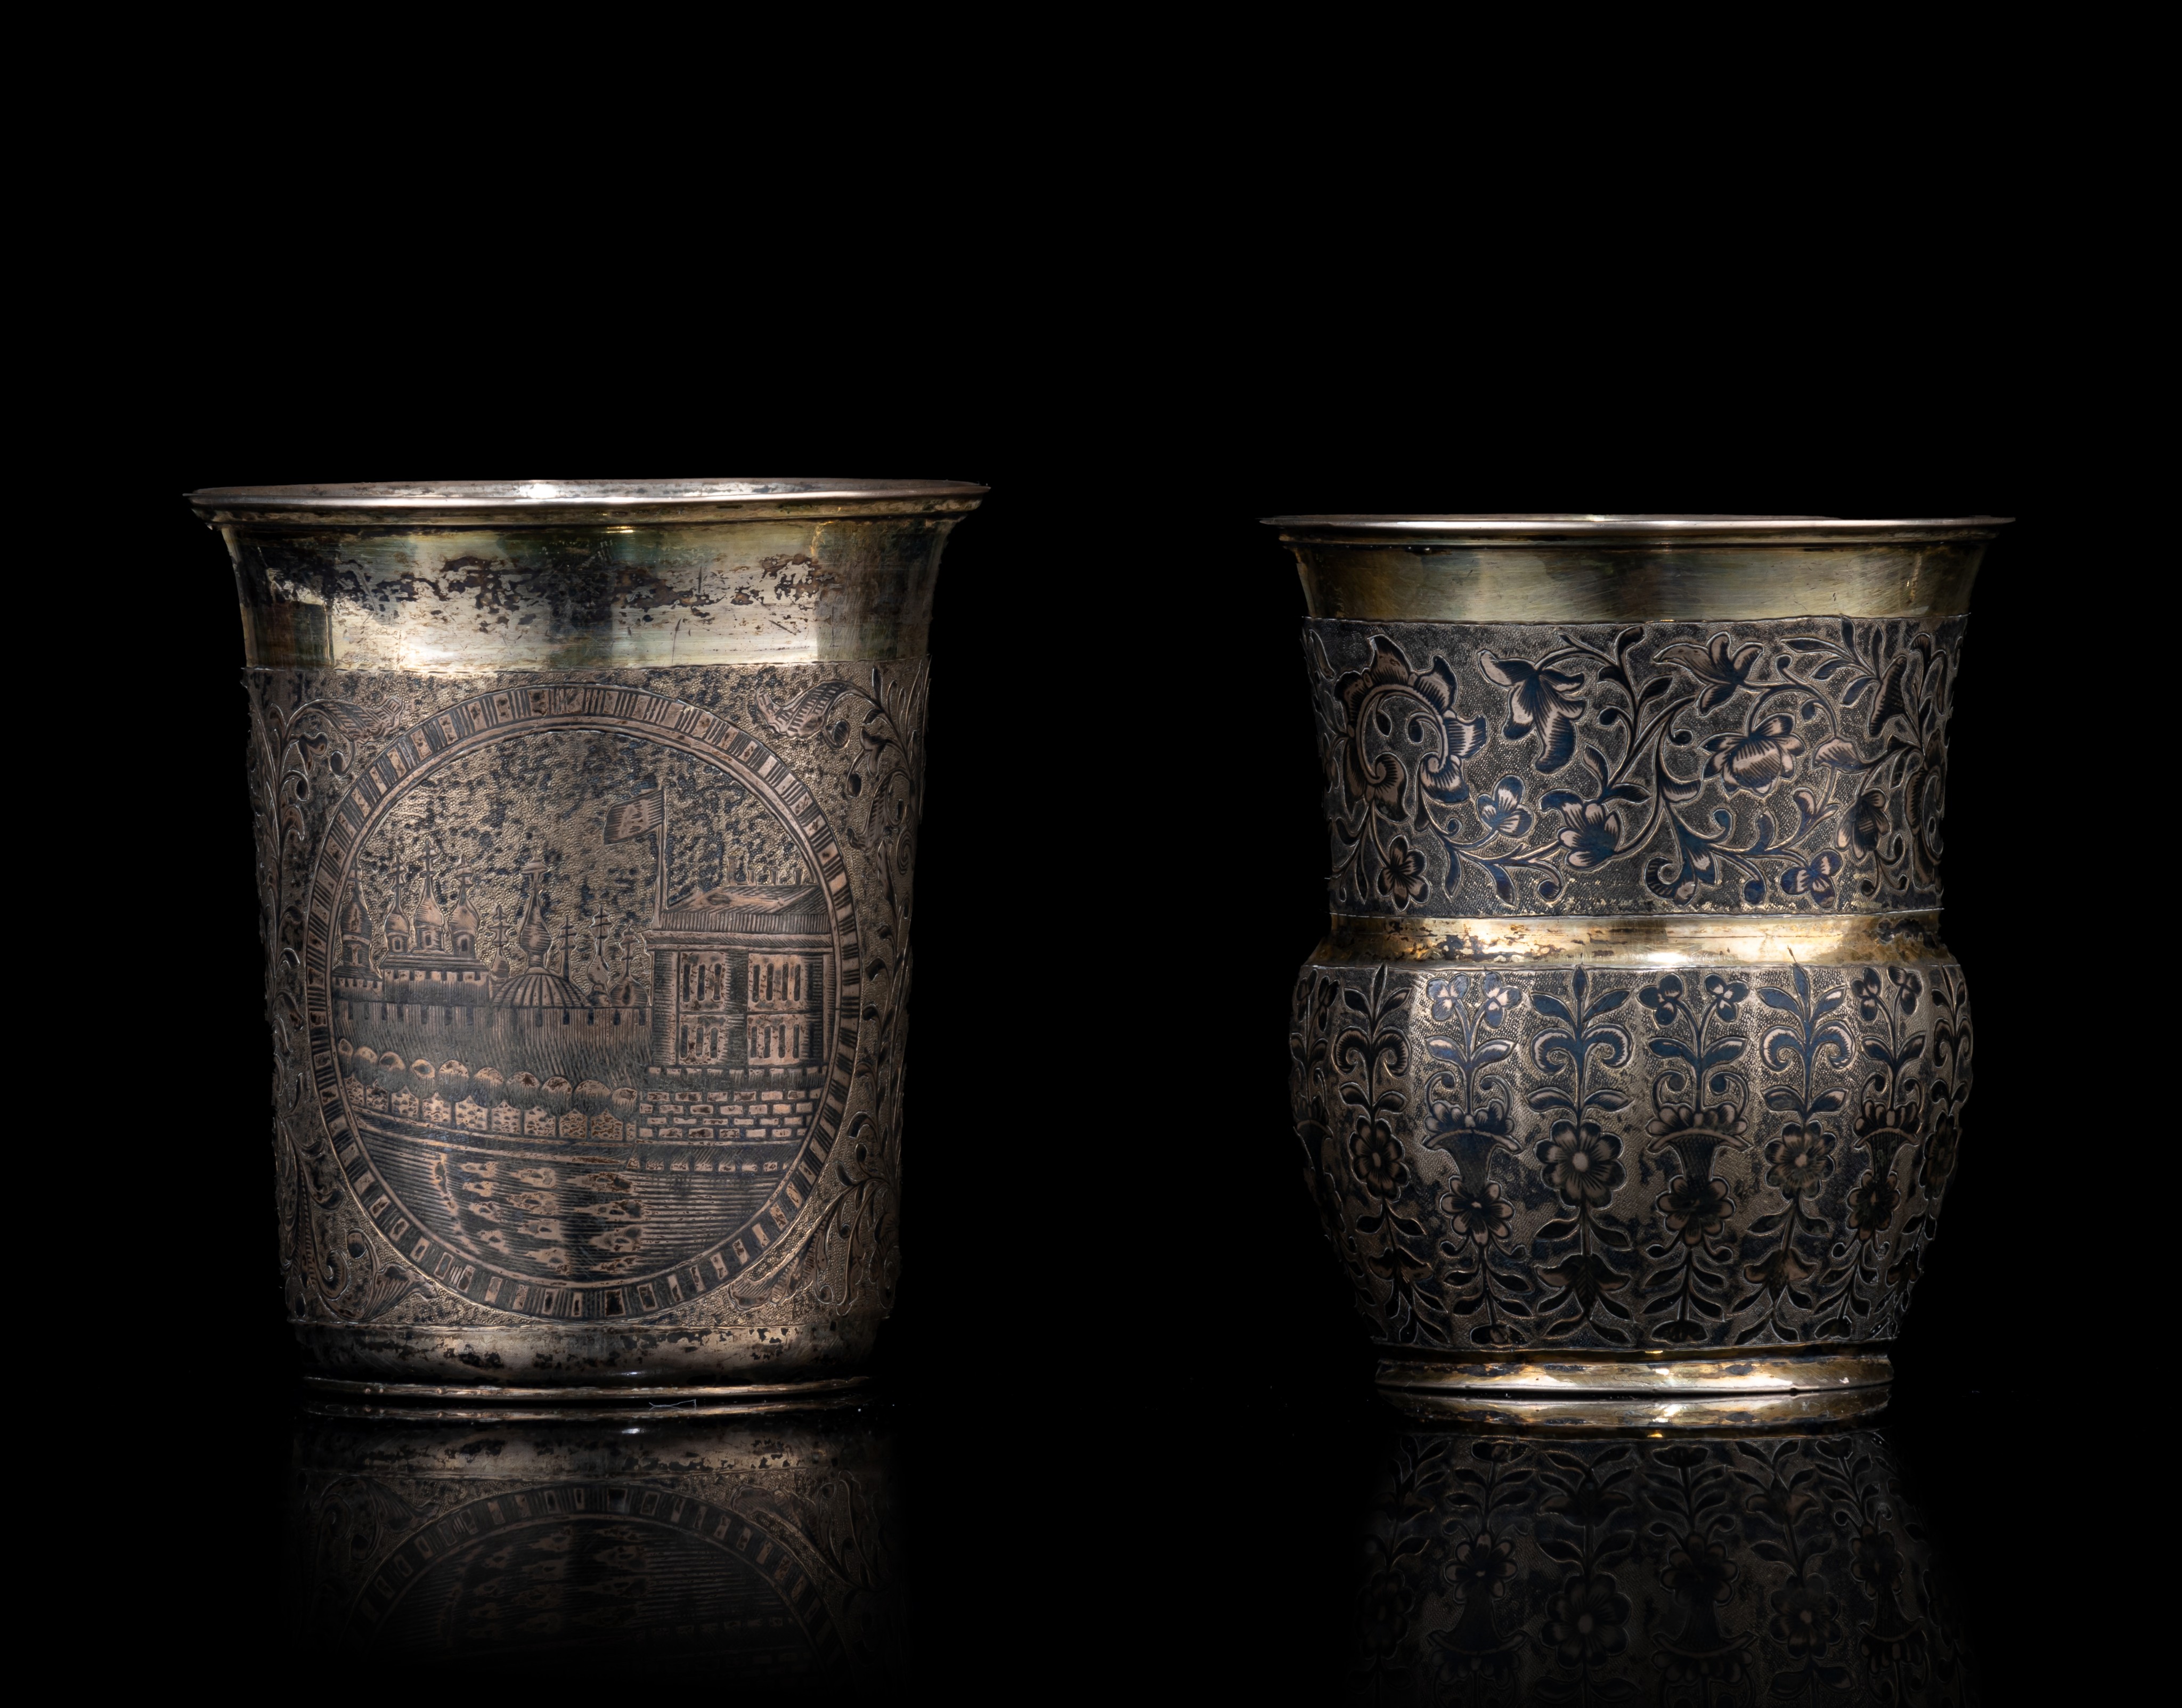 Two Russian silver-gilt and niello beakers, 84 zolotniki, H 9,5 - 10 cm - total weight: 357 g - Image 4 of 9